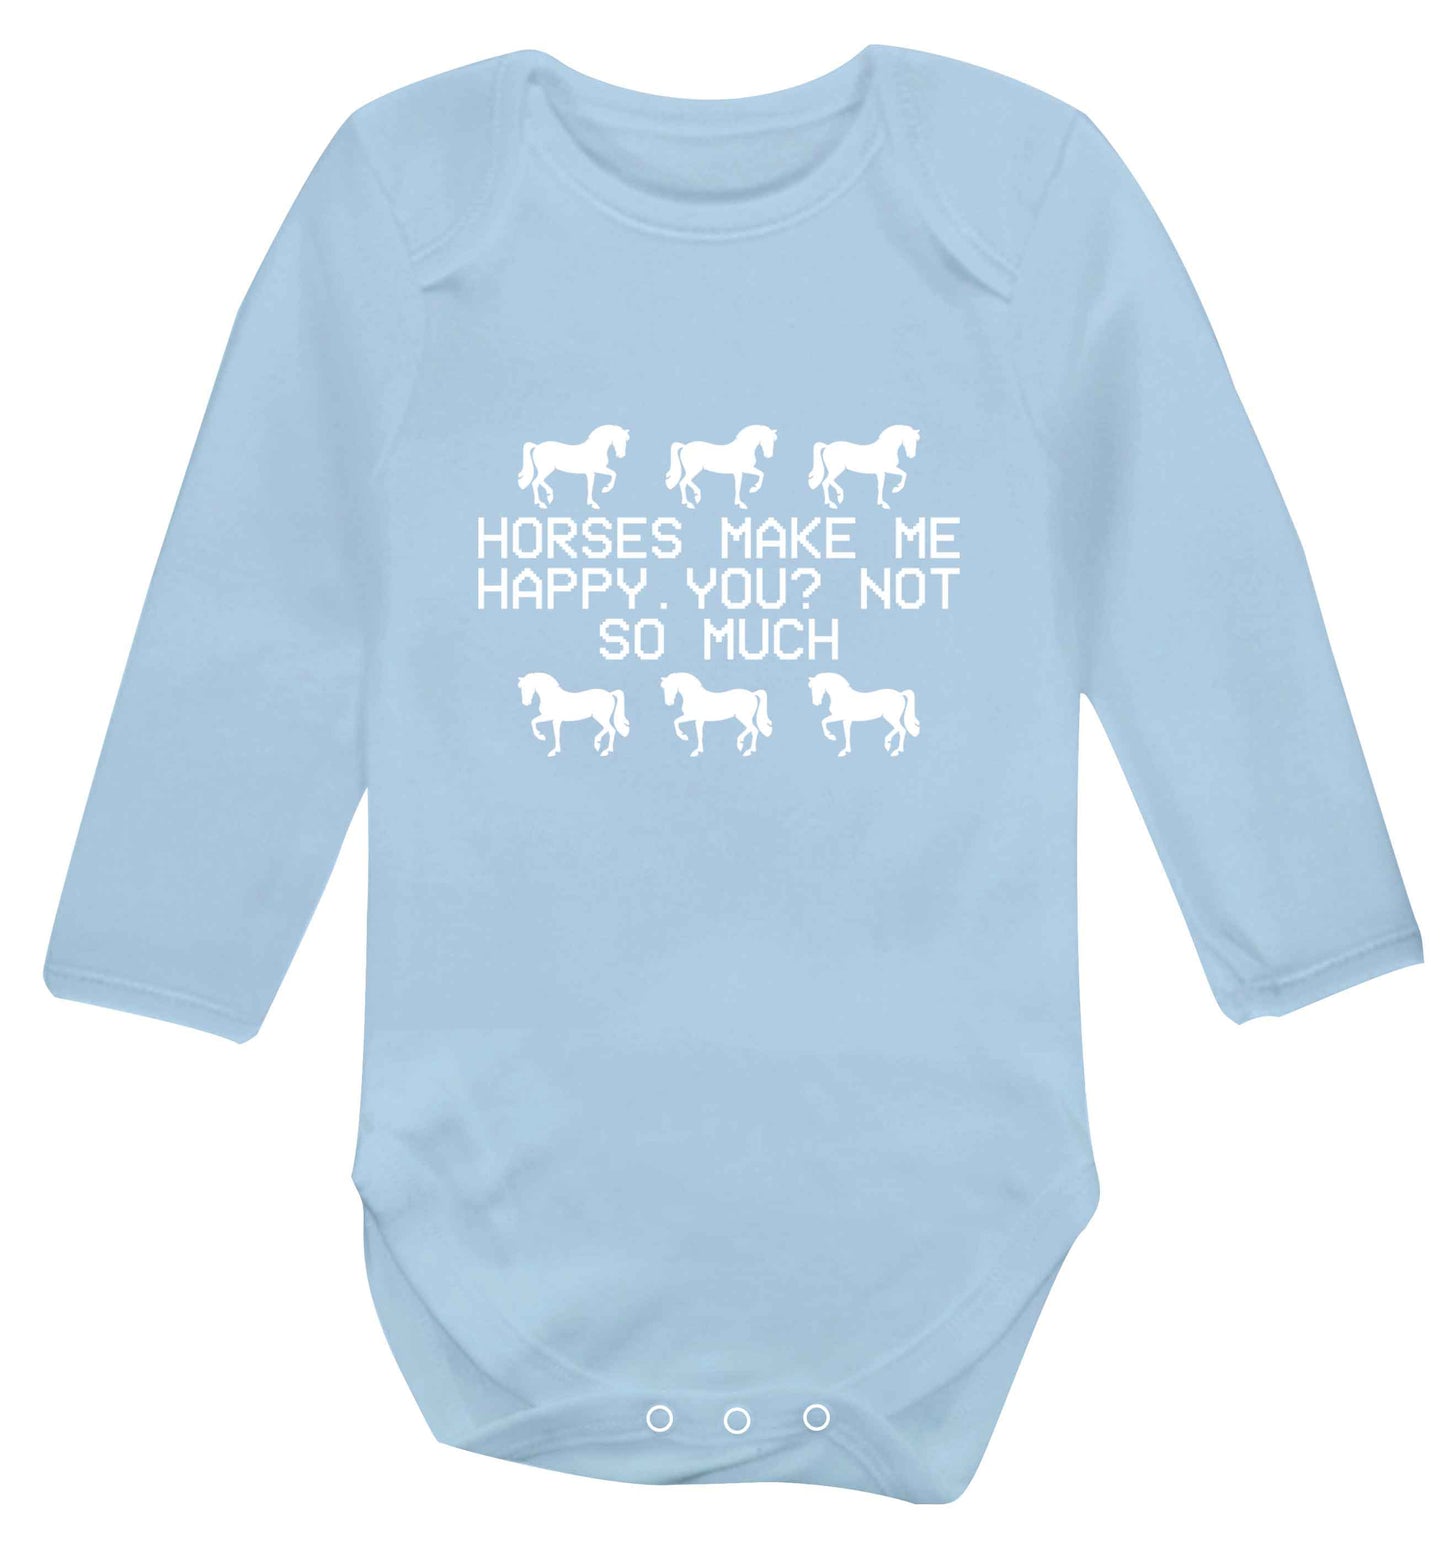 Horses make me happy, you not so much baby vest long sleeved pale blue 6-12 months